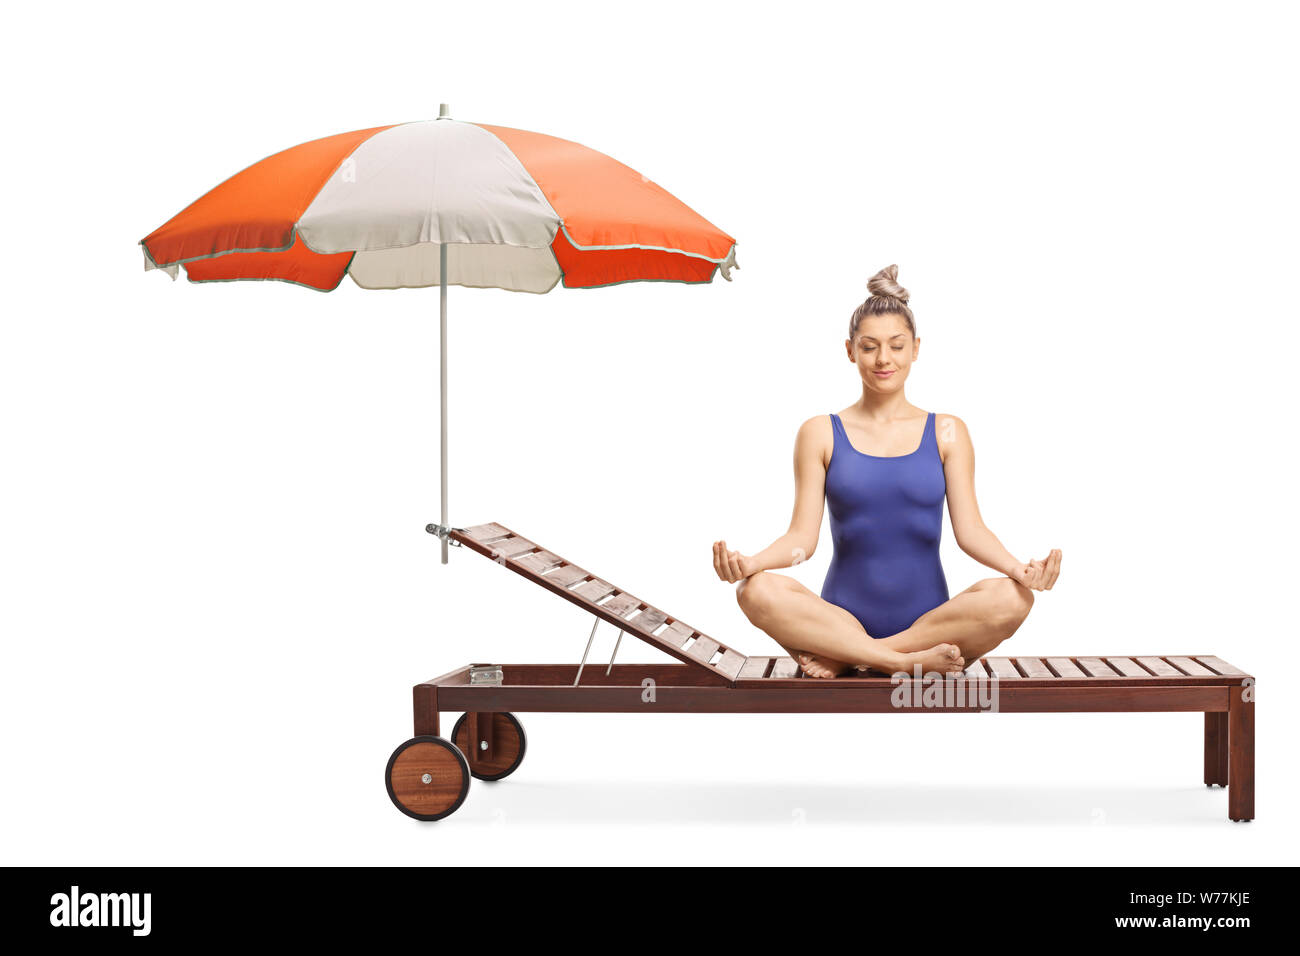 Young woman in a swimming suit meditating on a sunbed under umbrella isolated on white background Stock Photo